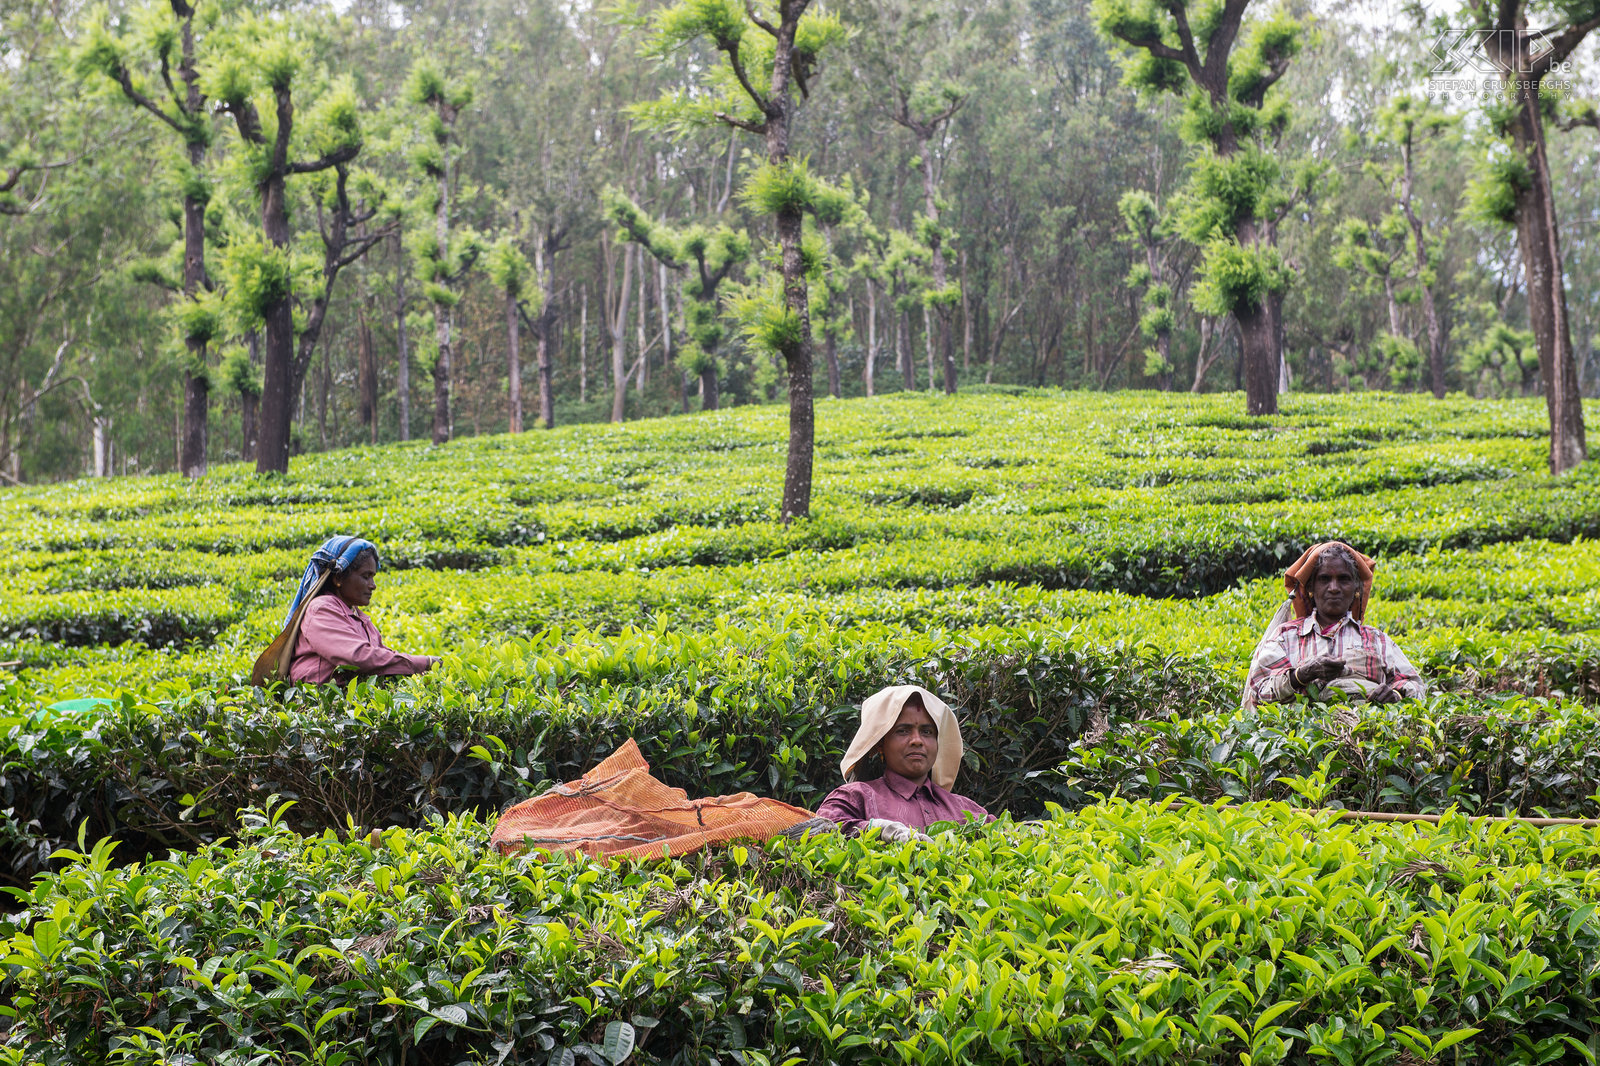 Valparai - Tea fields - Pickers Indian women picking tea leaves in a tea plantation in Valparai. Tea is harvested by hand multiple times a year. Not all leaves are picked during harvesting but only a few top young and juicy leaves. Stefan Cruysberghs